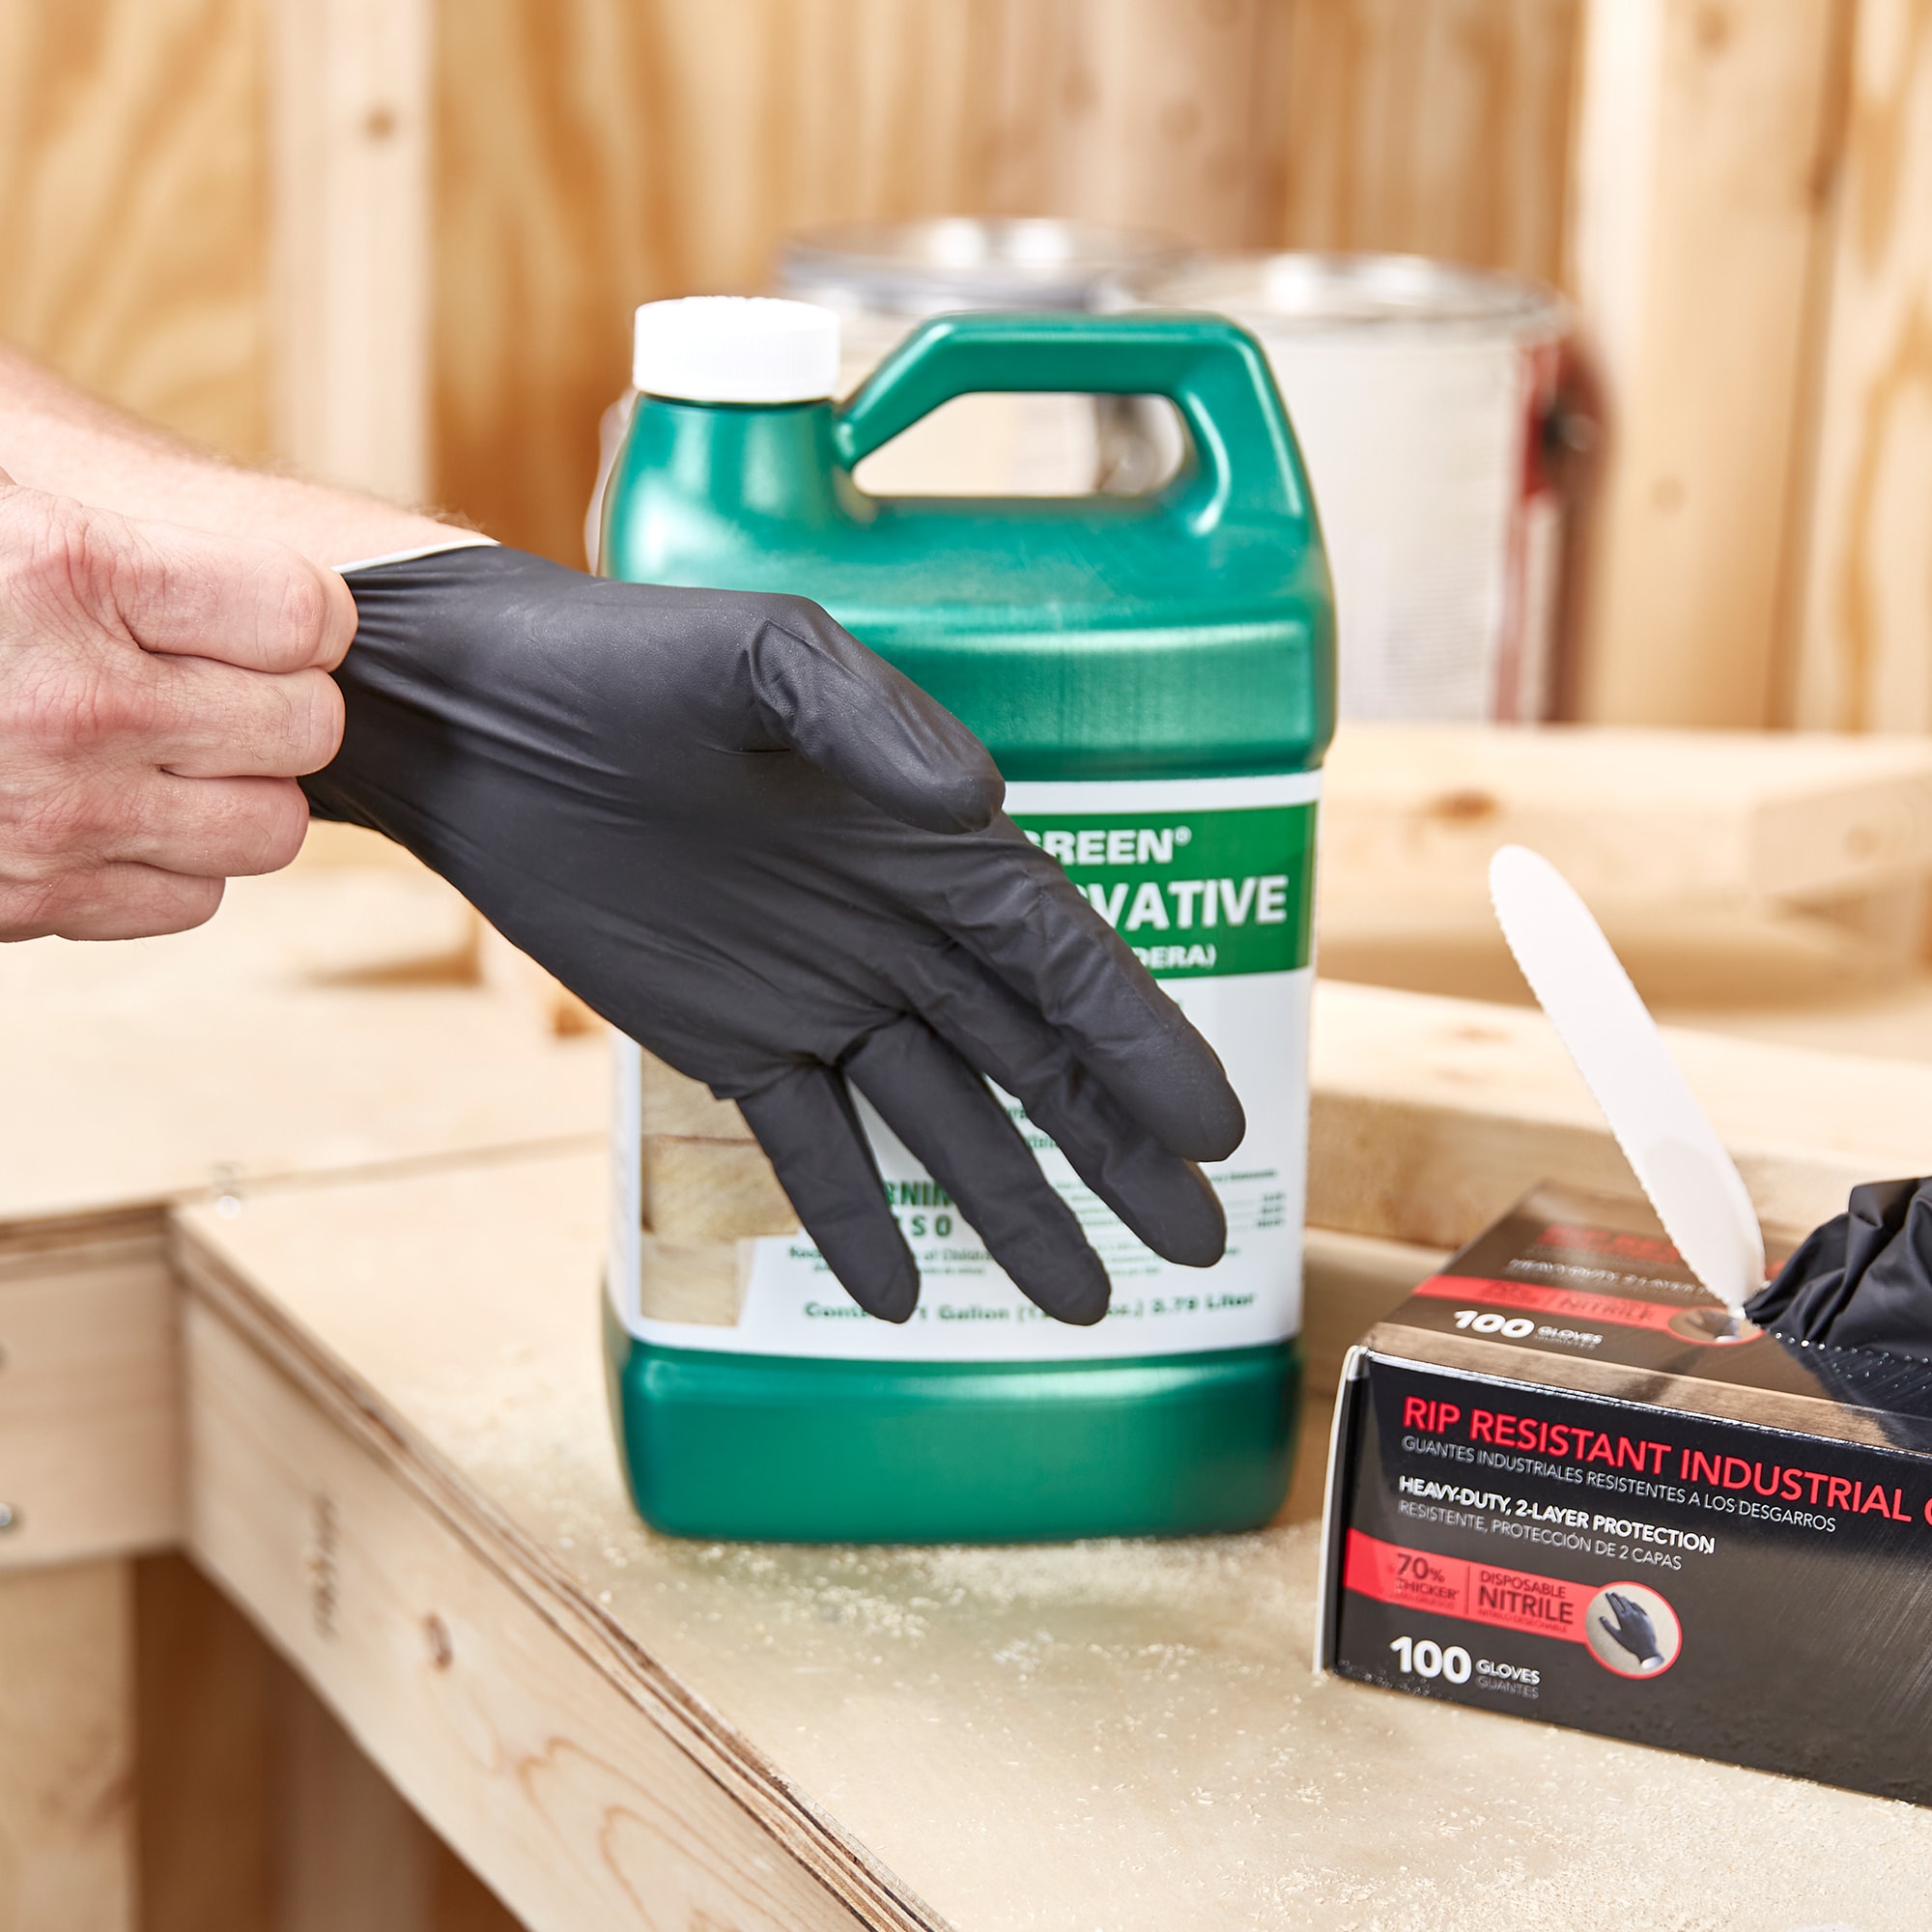 Mechanic Glove – Noble Outfitters